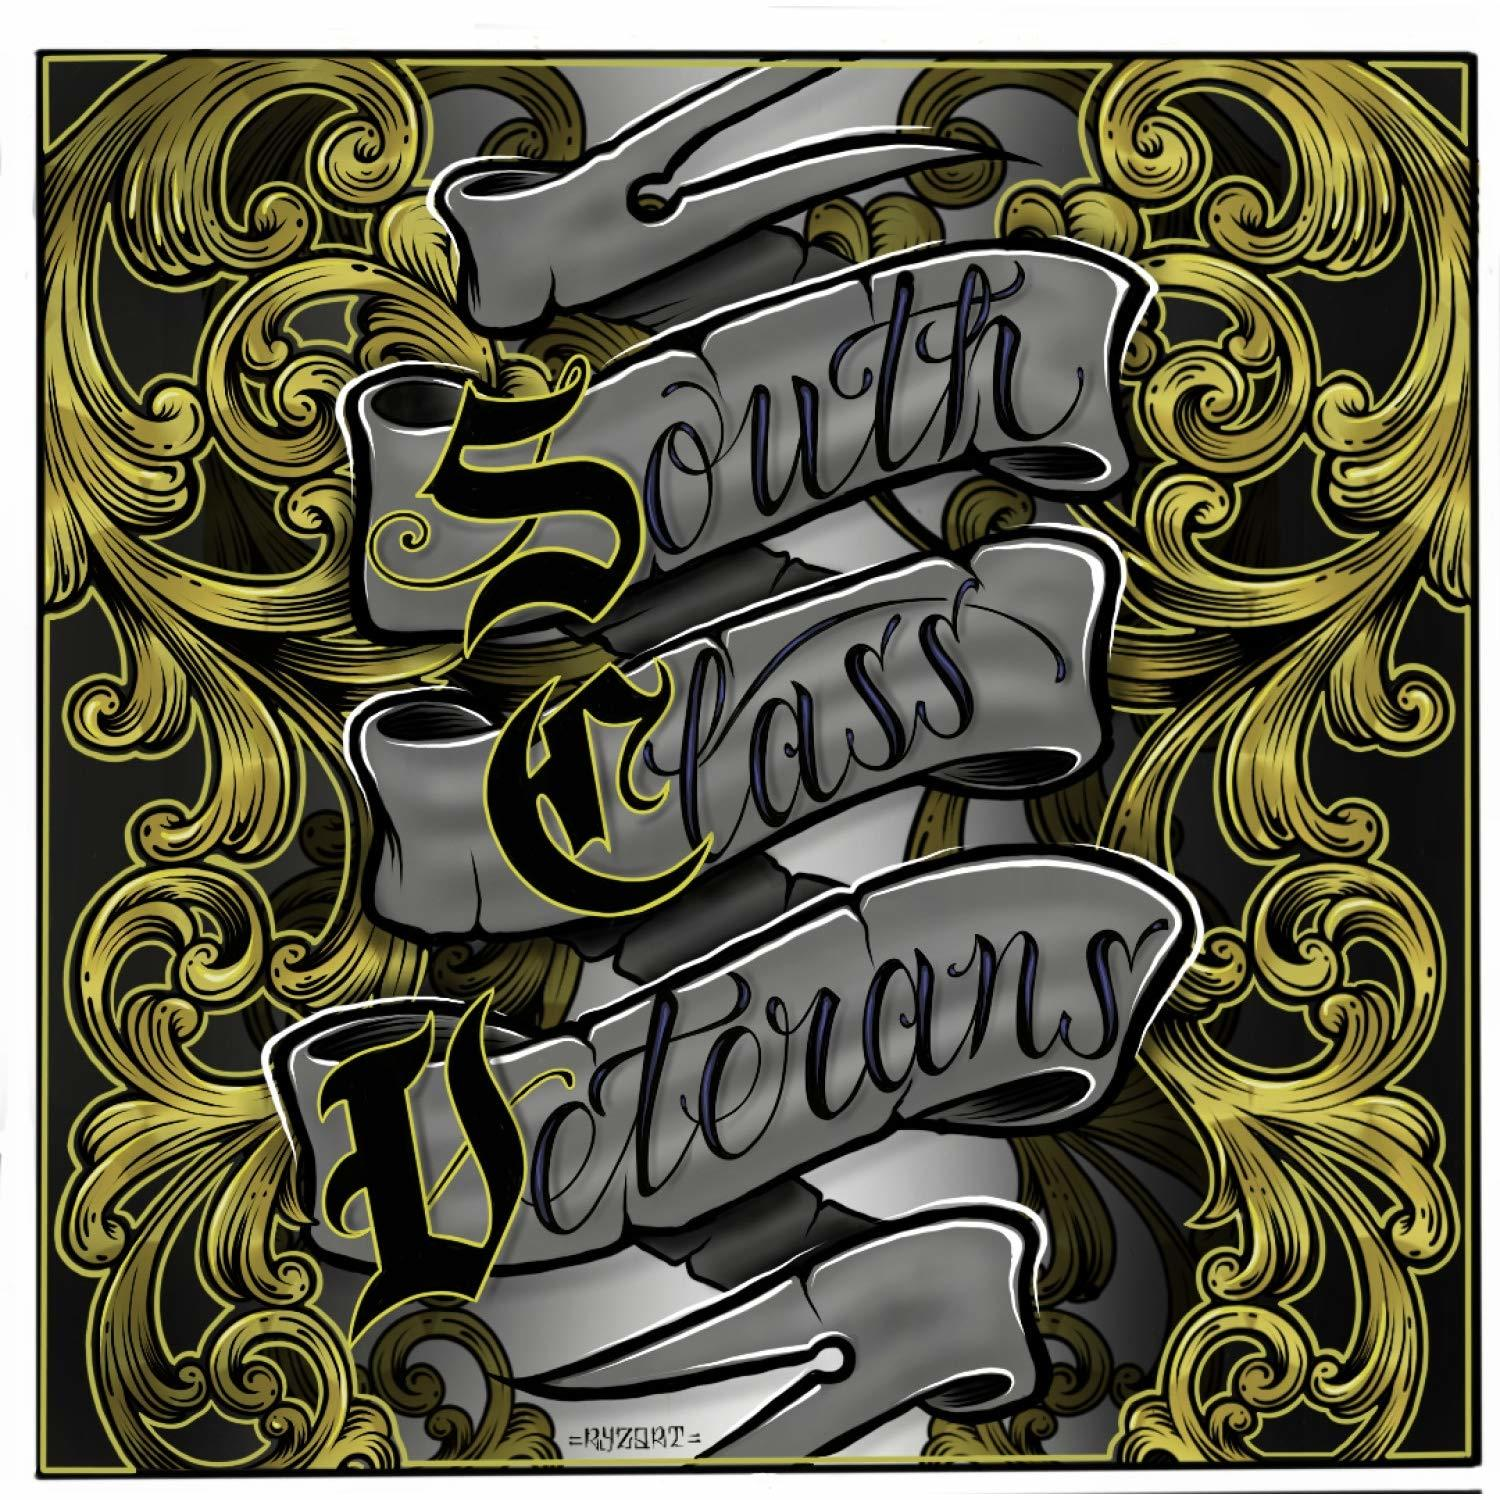 Class (CD) - Veterans South To - Hell Pay